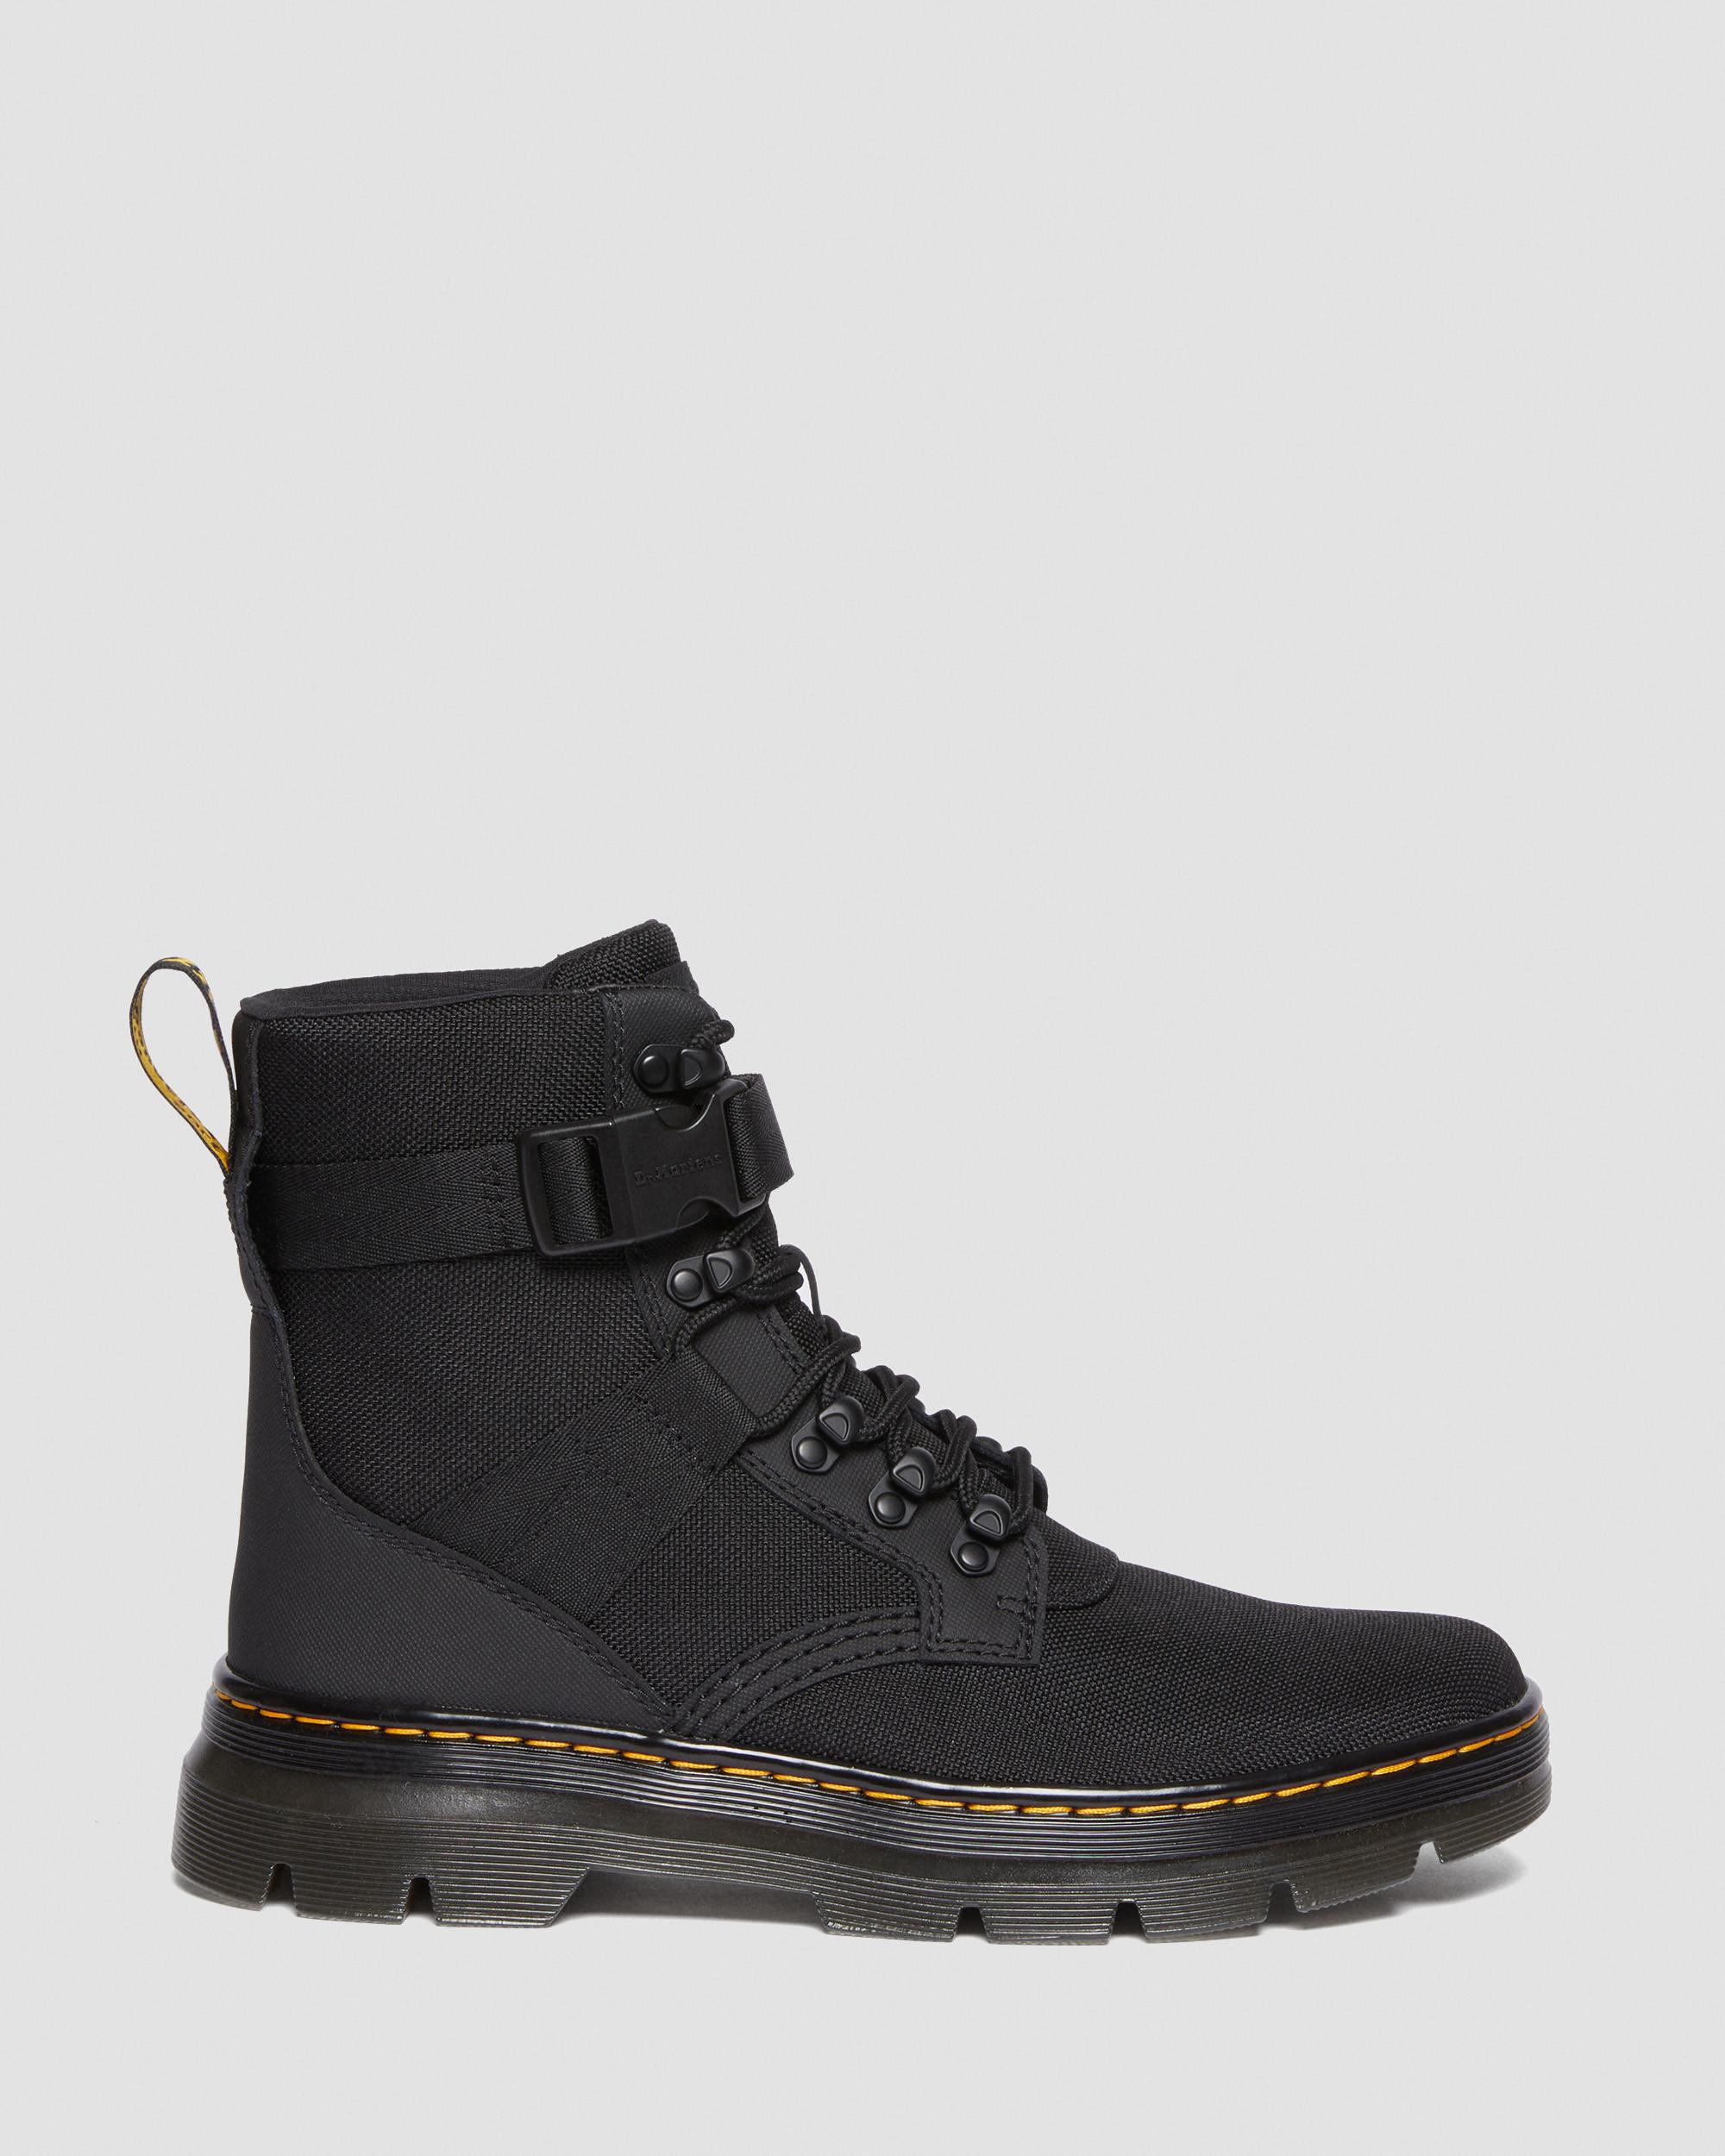 Combs Tech II Extra Tough Utility Boots in Black